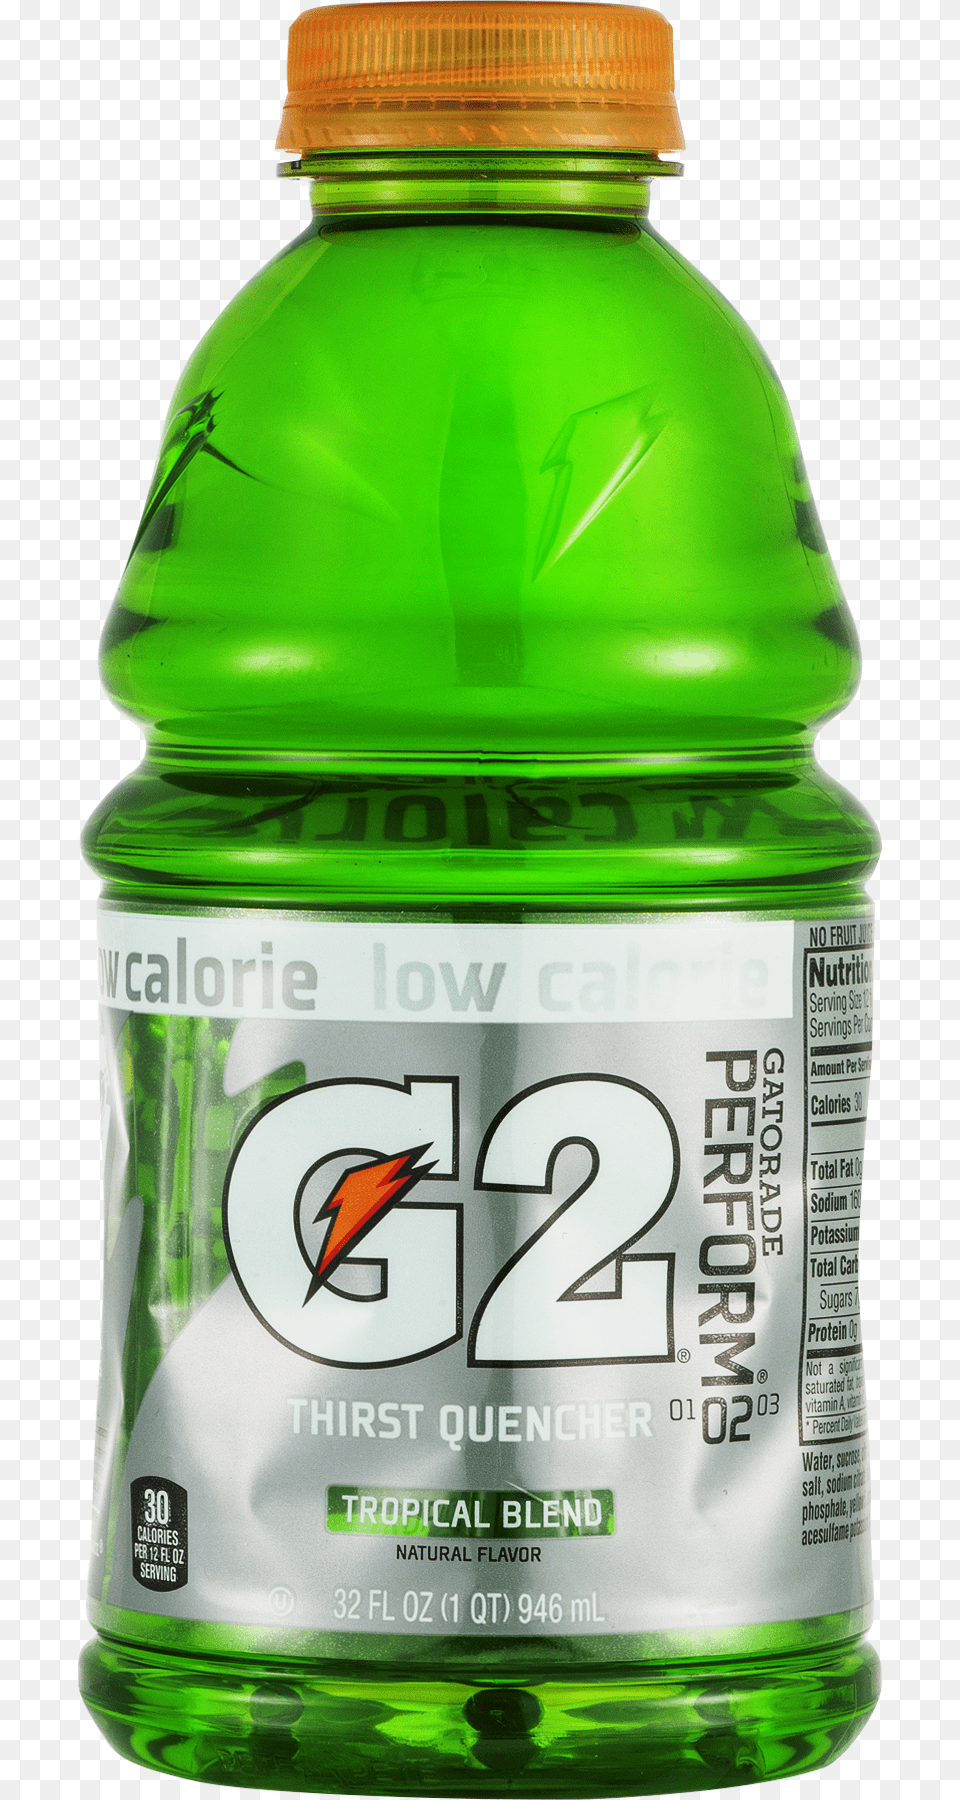 Gatorade G2 Thirst Quencher Tropical Blend Drink Sports Drink, Bottle, Beverage, Can, Tin Png